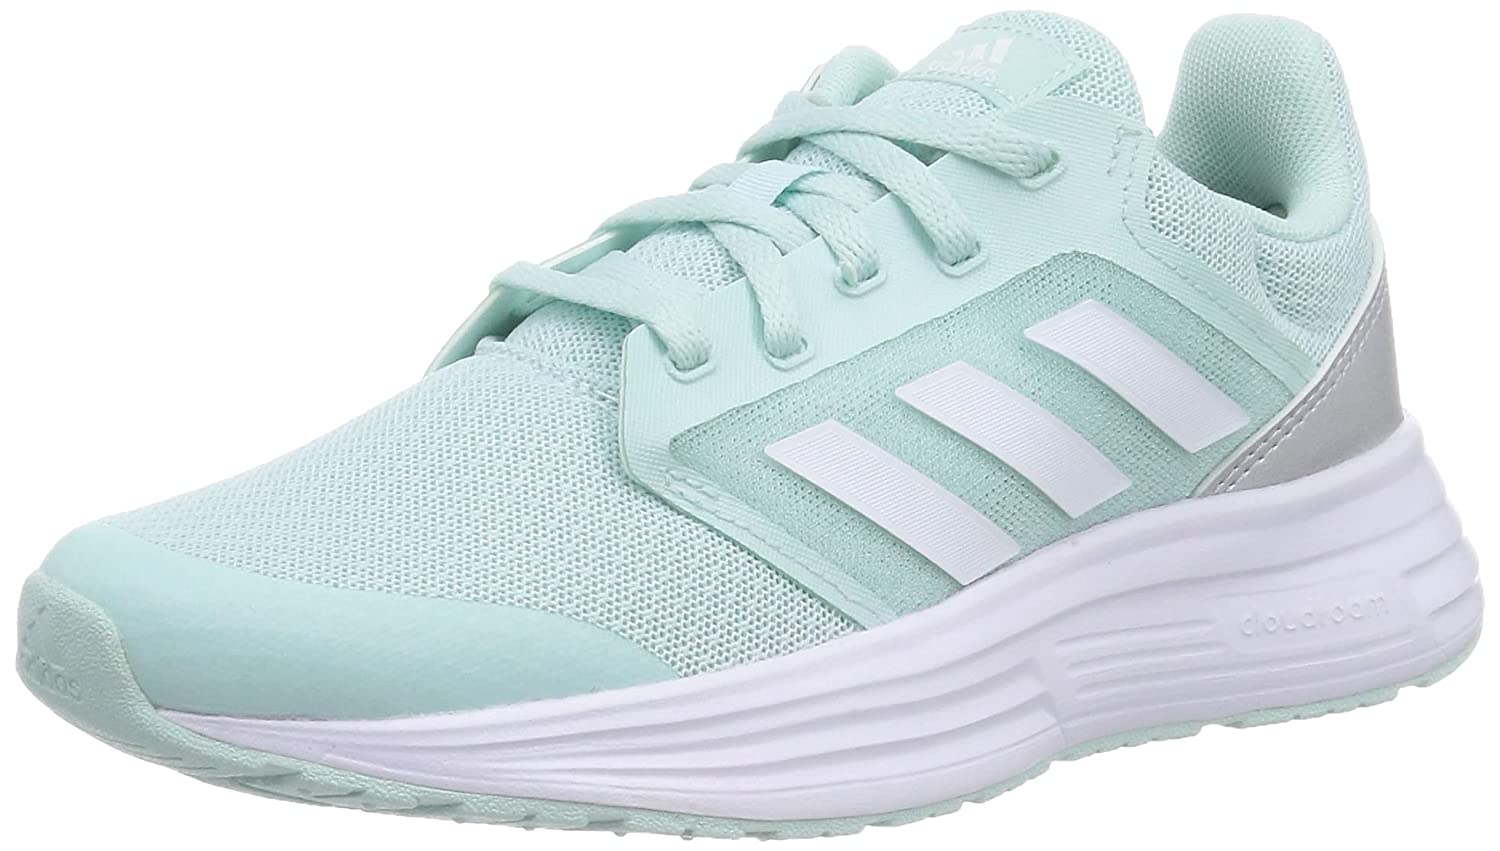 Amazon Festival Sale On Adidas Shoes Buy Adidas For Men Adidas Sports Discount Adidas Women Sneakers | Festival Sale: Will Not Get Adidas Shoes At A Cheaper Price